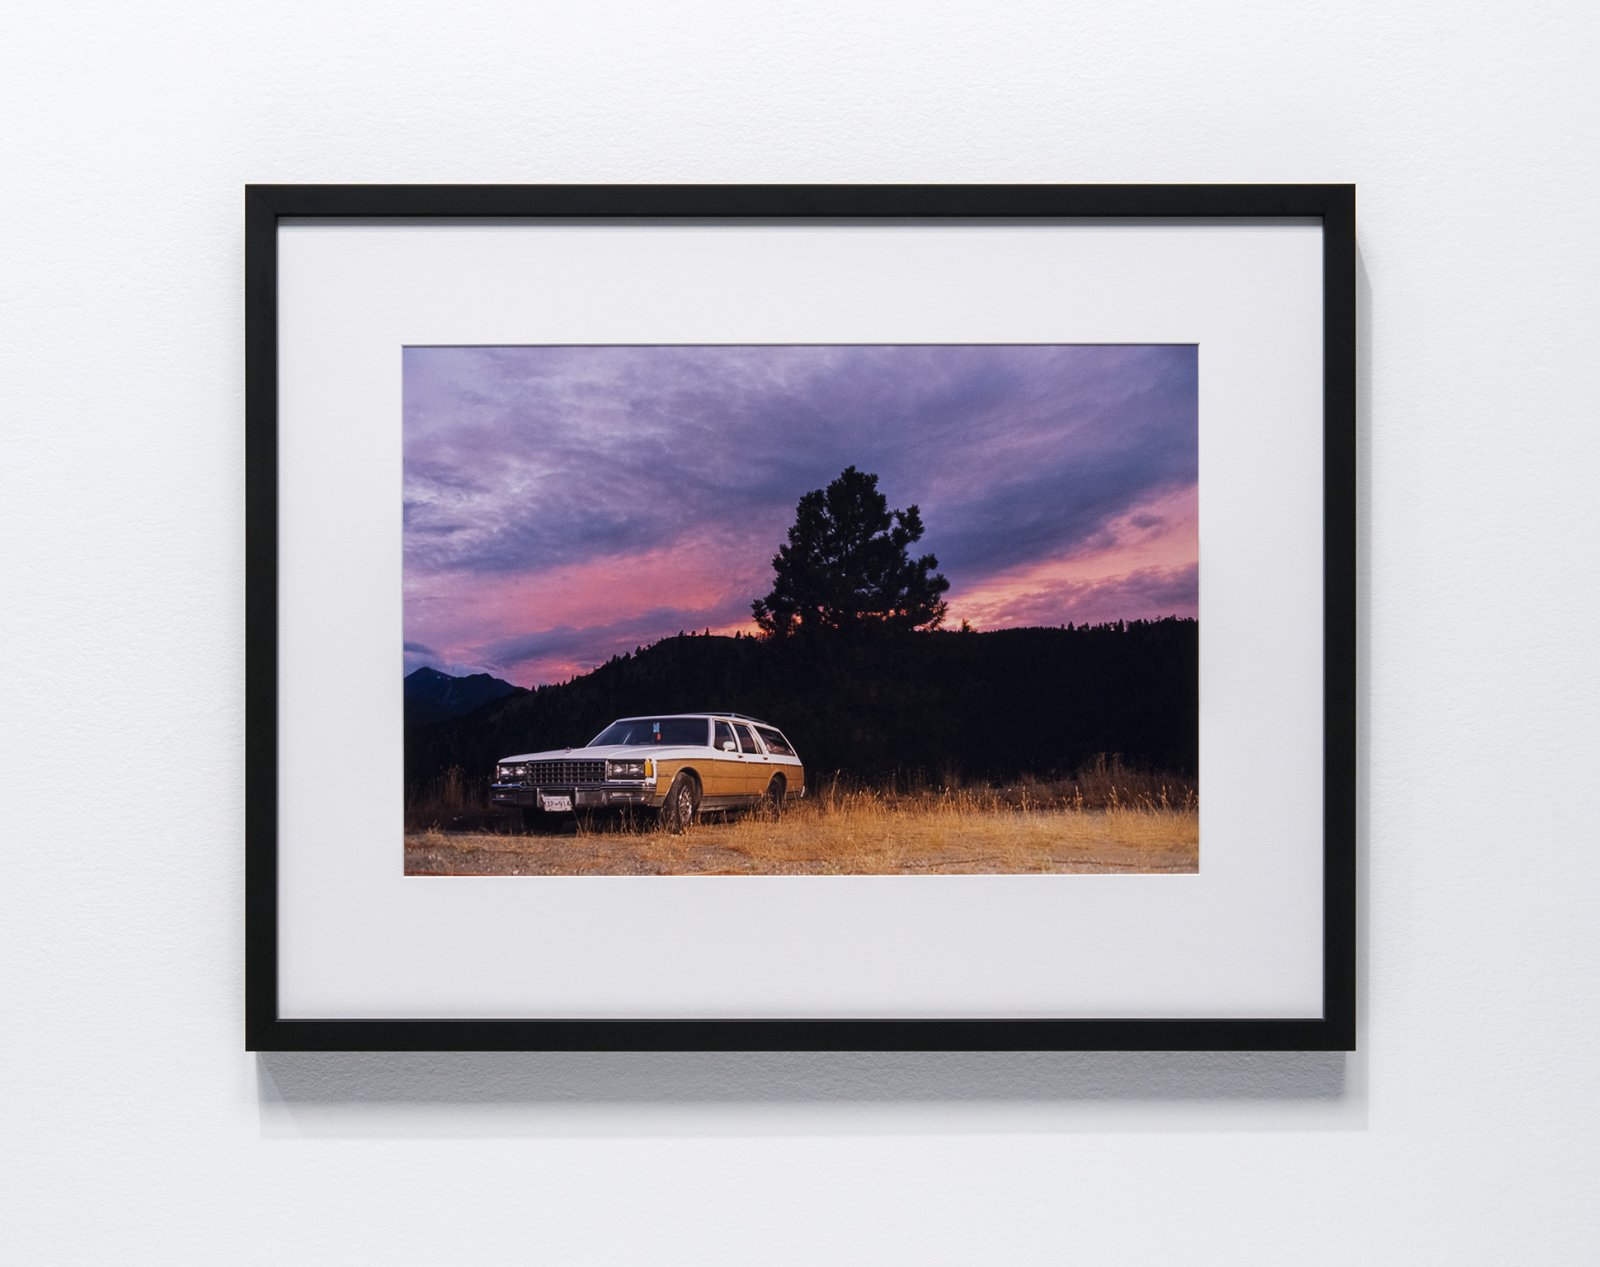 Kevin Schmidt, 1984 Chevrolet Caprice Classic Wagon, 94000 kms. Good Condition. Engine Needs Minor Work, $1200 OBO 604 888 3243, 2000, c-print, 16 x 20 in. (41 x 51 cm)